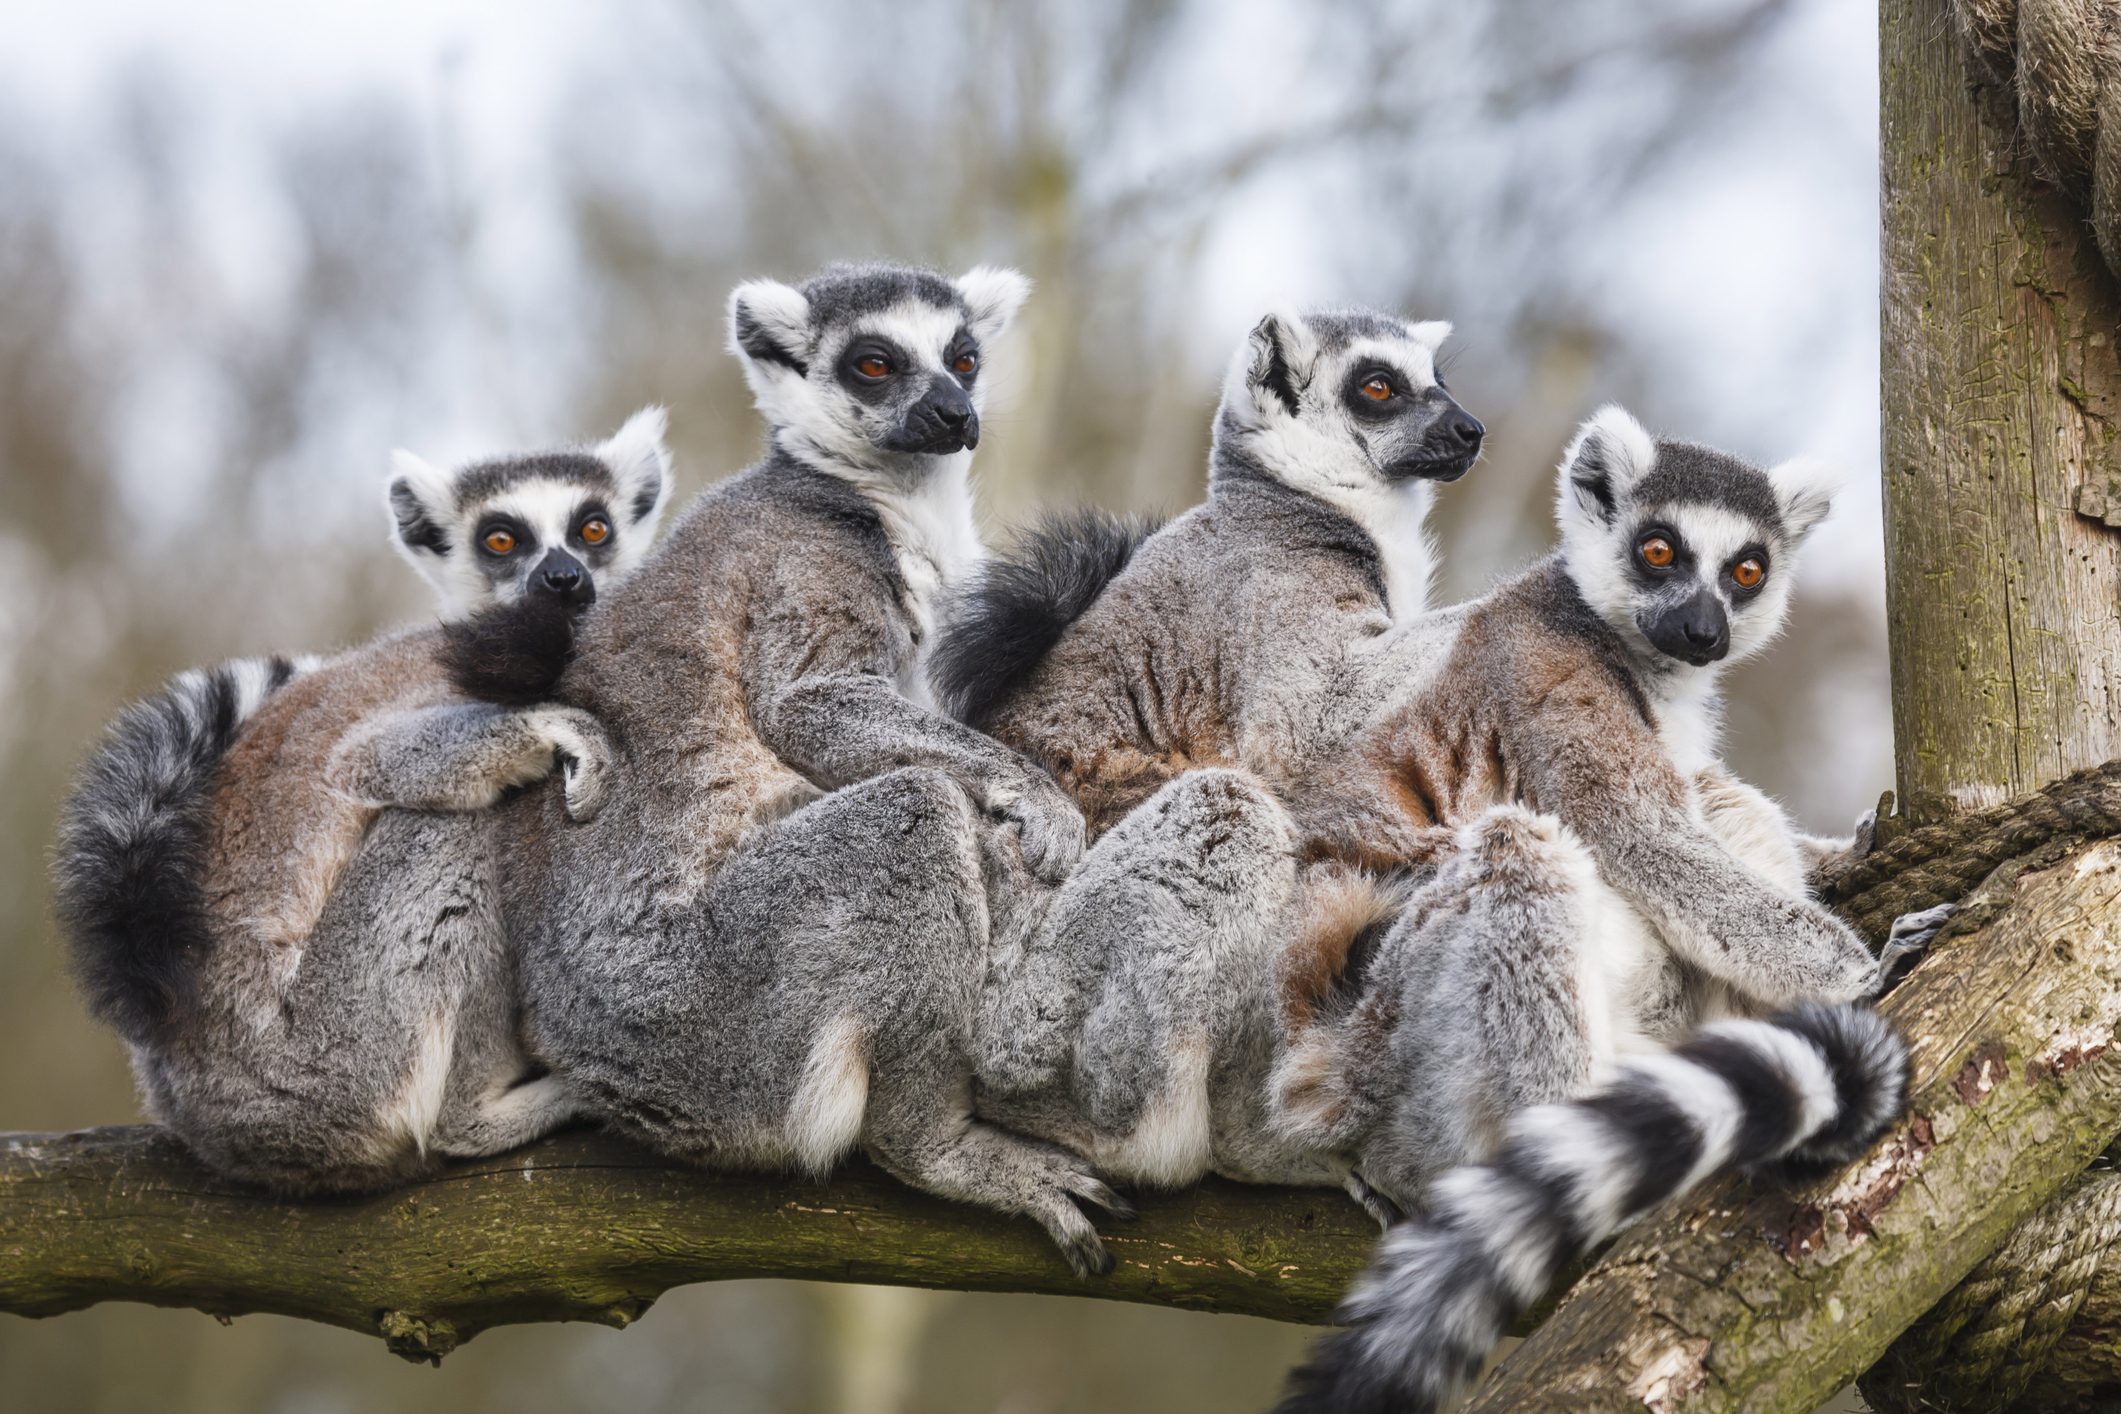 Lemur family sitting together in tree trunk